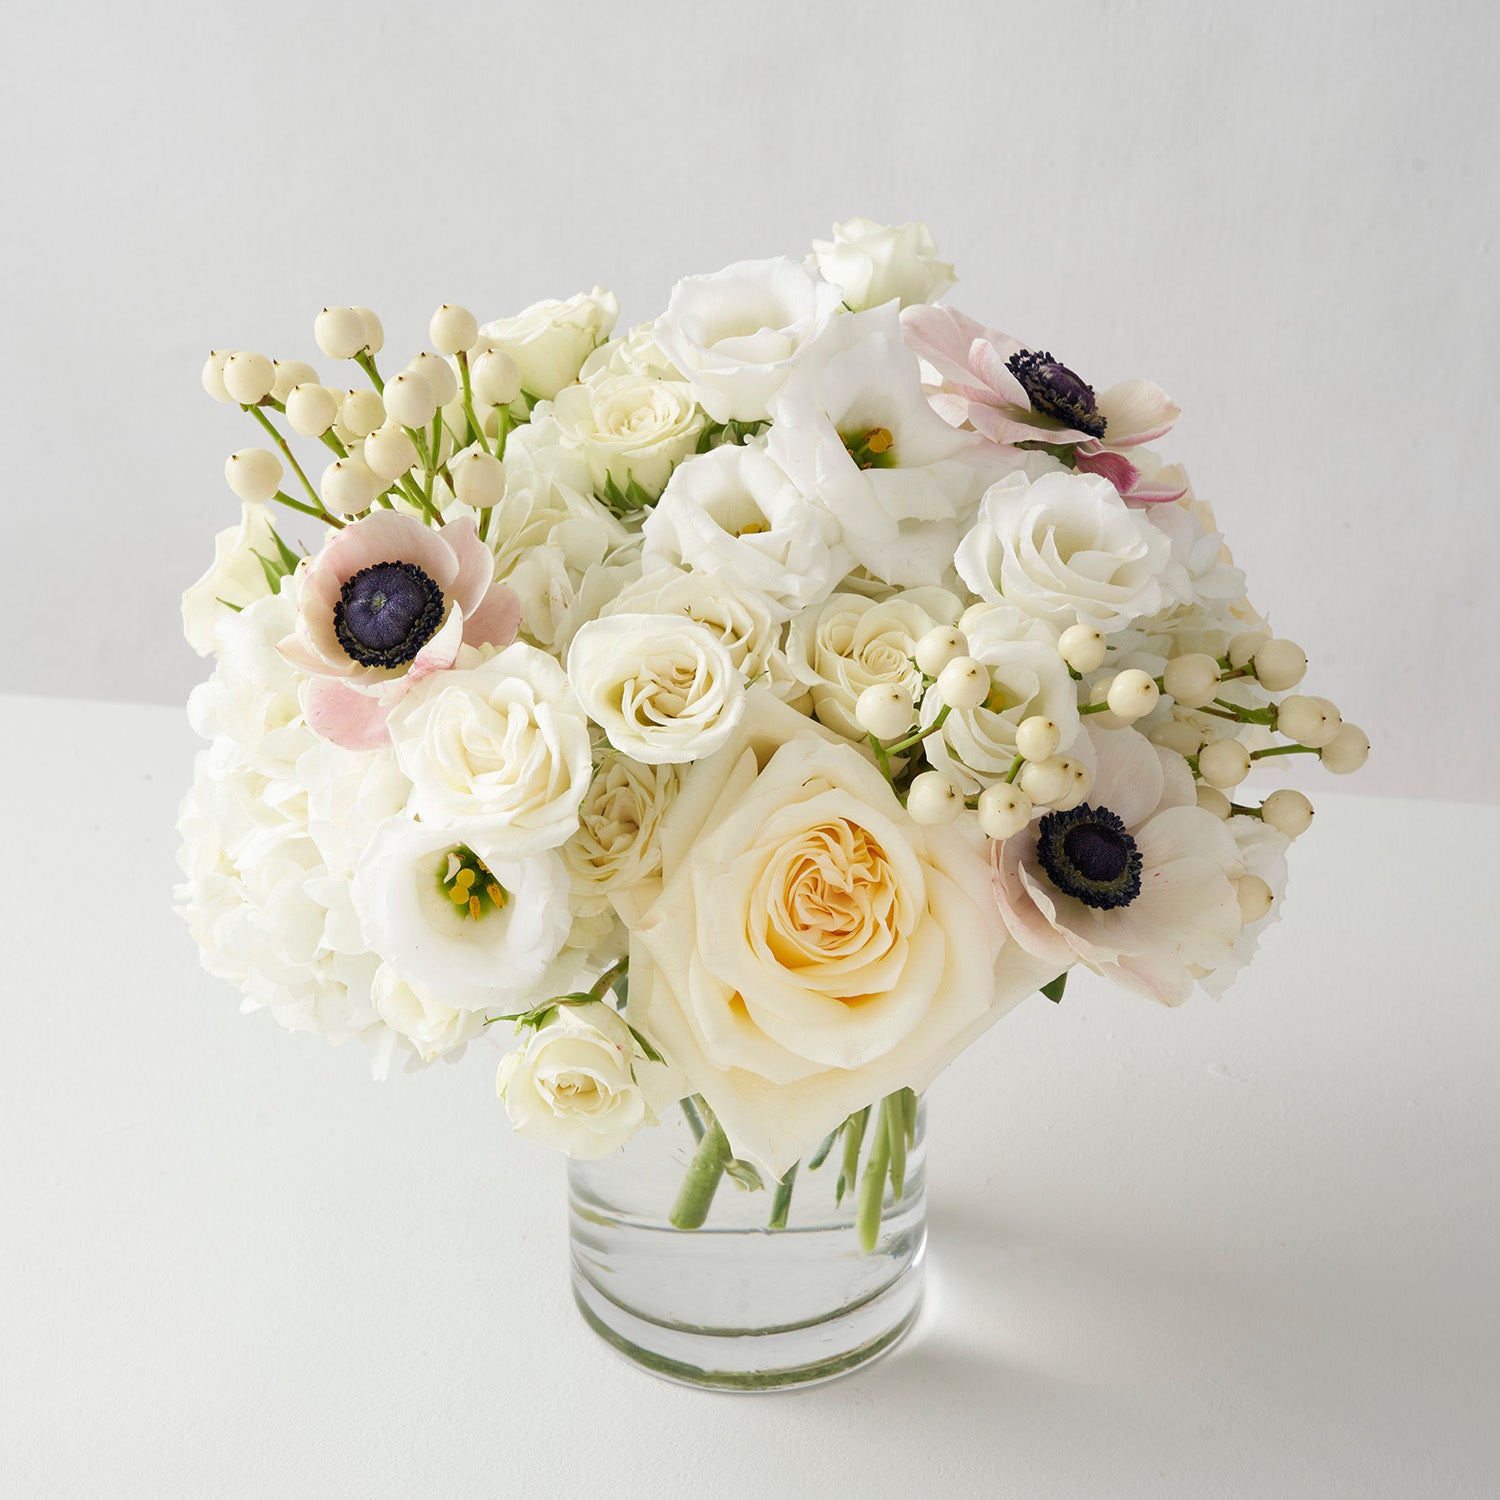 Clear glass vase of white and cream flowers, tightly arranged, centered on white background. 